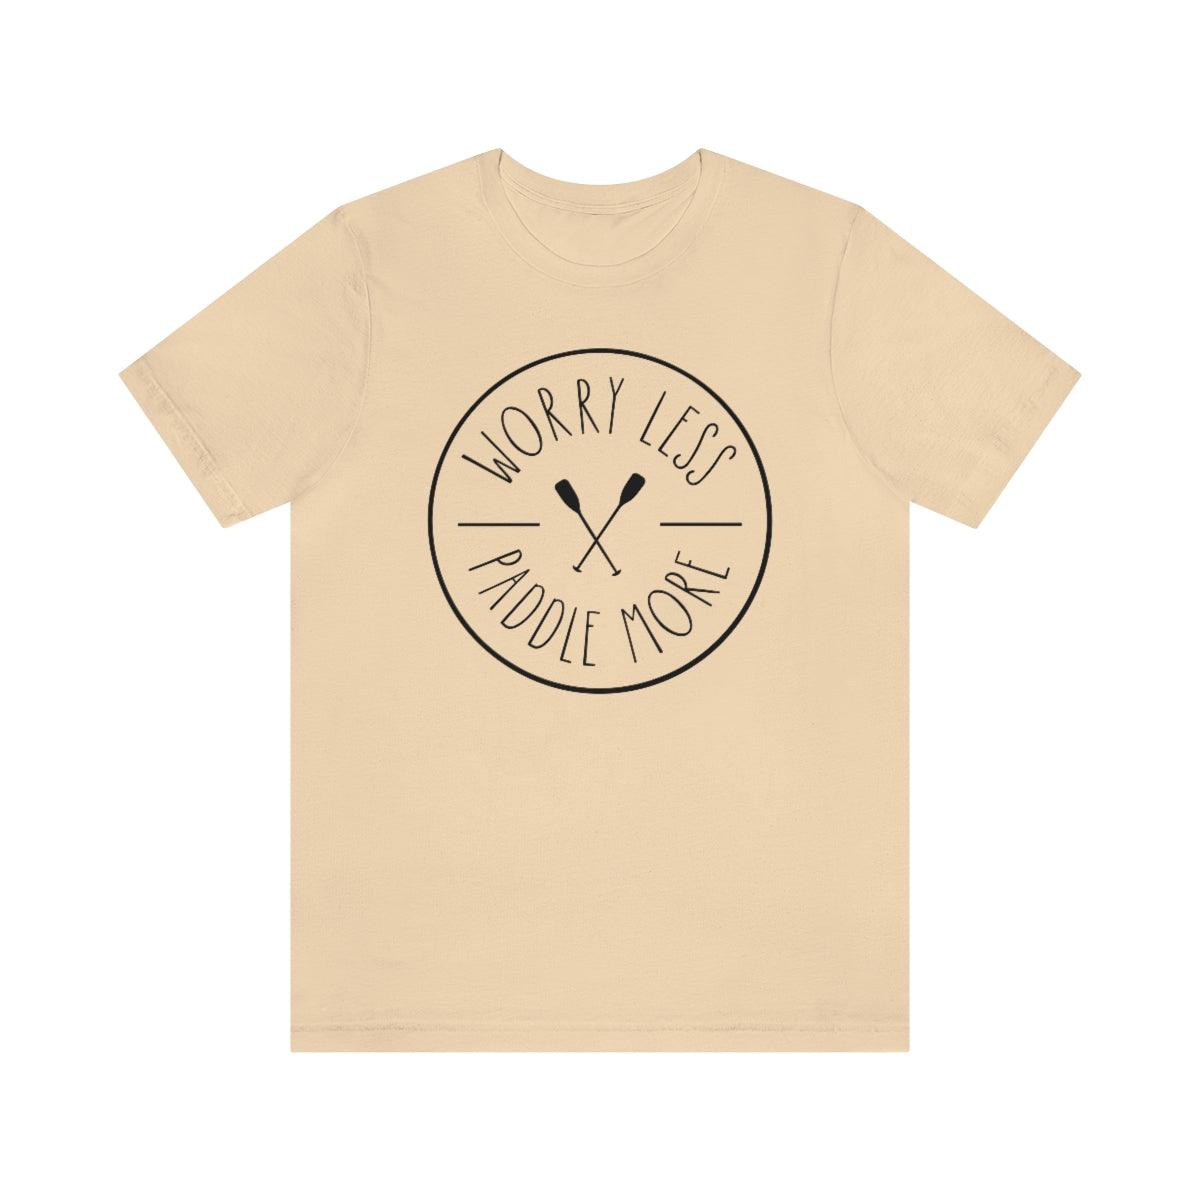 Worry Less Paddle More Short Sleeve Tee - Crystal Rose Design Co.